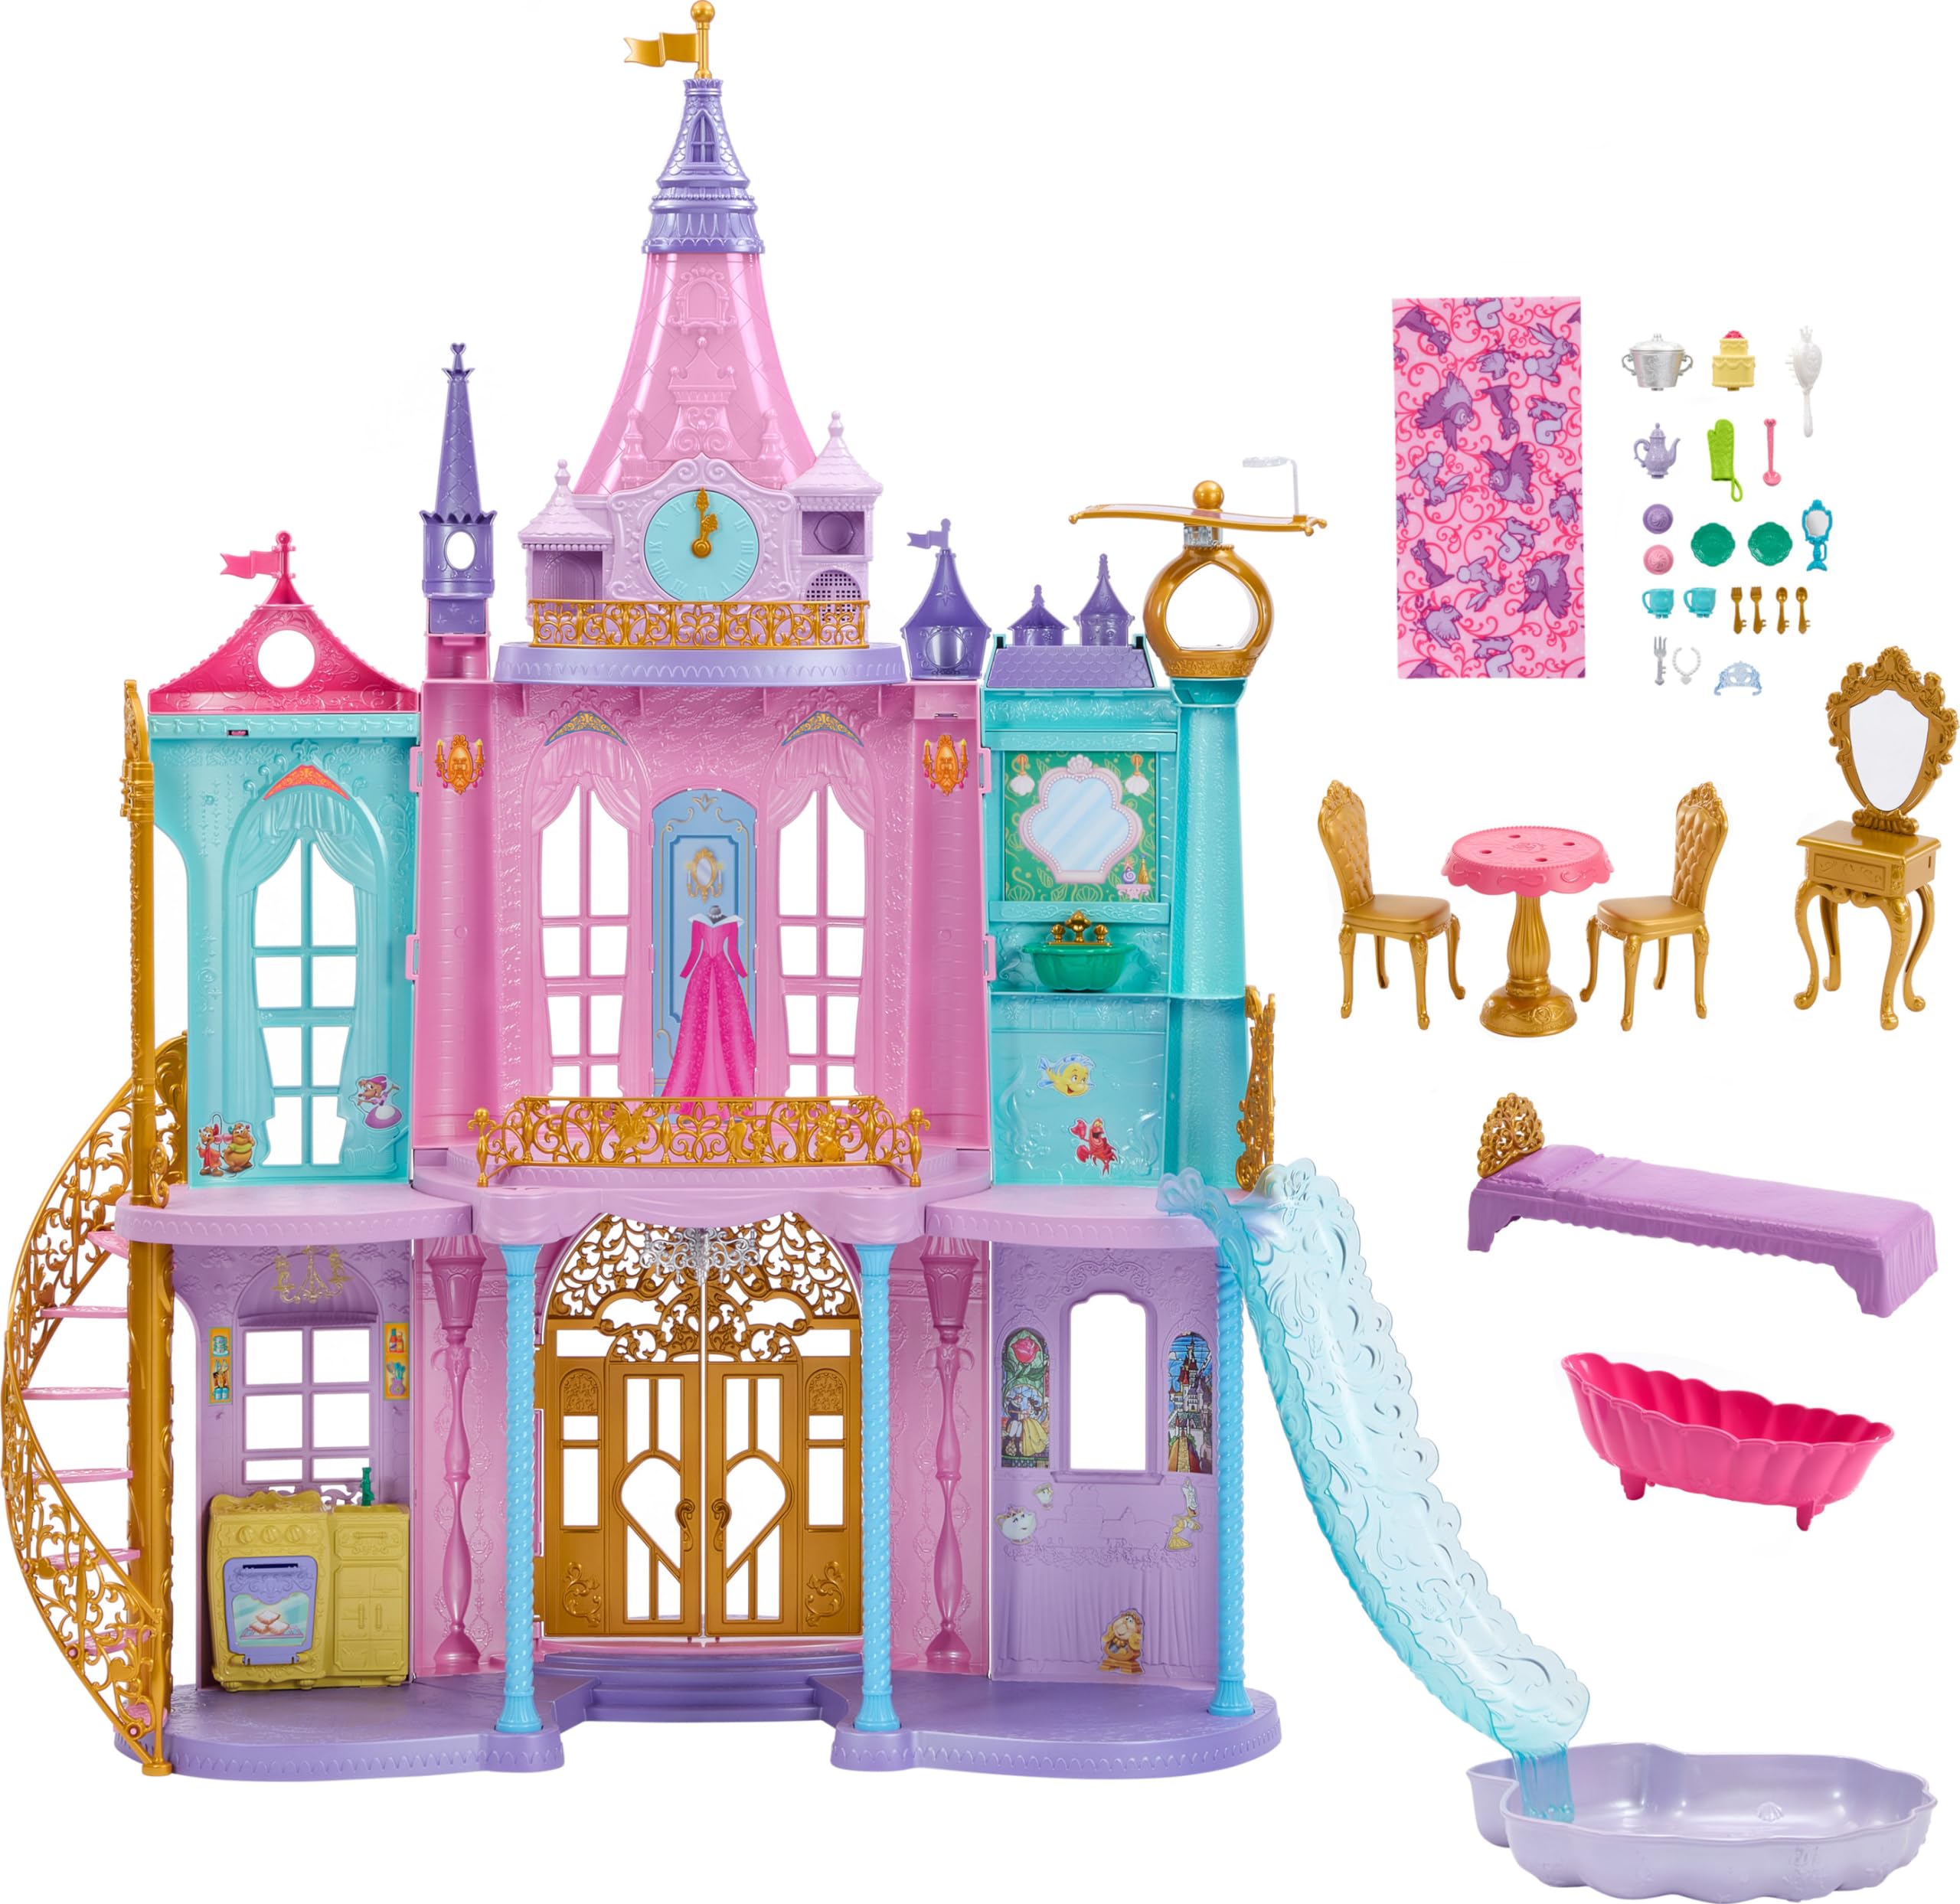 Disney Princess by Mattel, Ultimate Castle 4 Ft Tall with Lights & Sounds, 3 Levels, 10 Play Areas and 25+ Furniture & Pieces, Inspired by Disney Movies